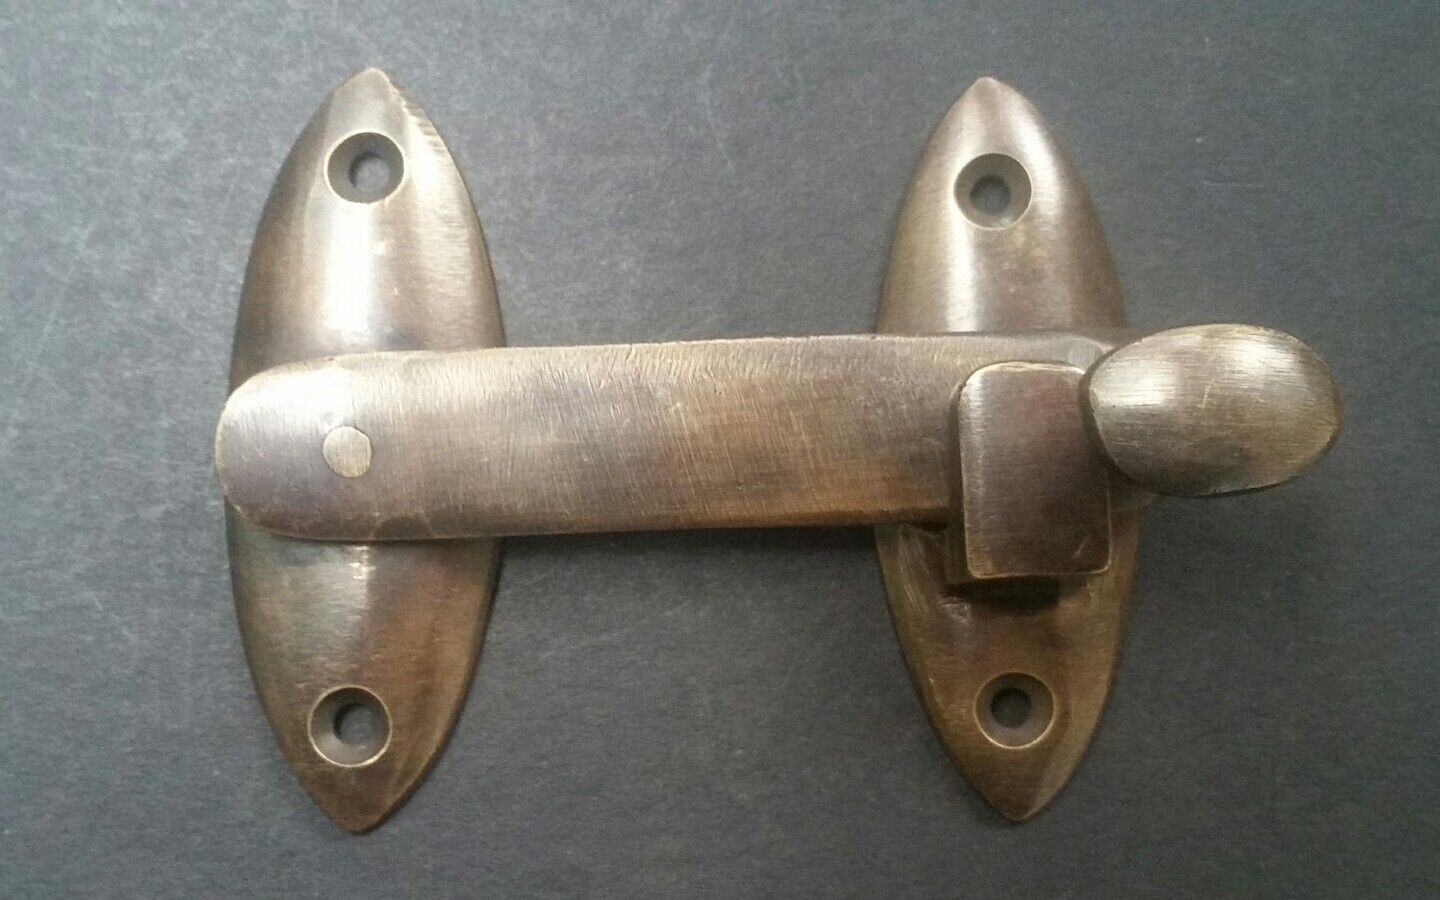 4 x solid brass toggle latch 3-1/4”w x 2-1/4" tall overall size #X22